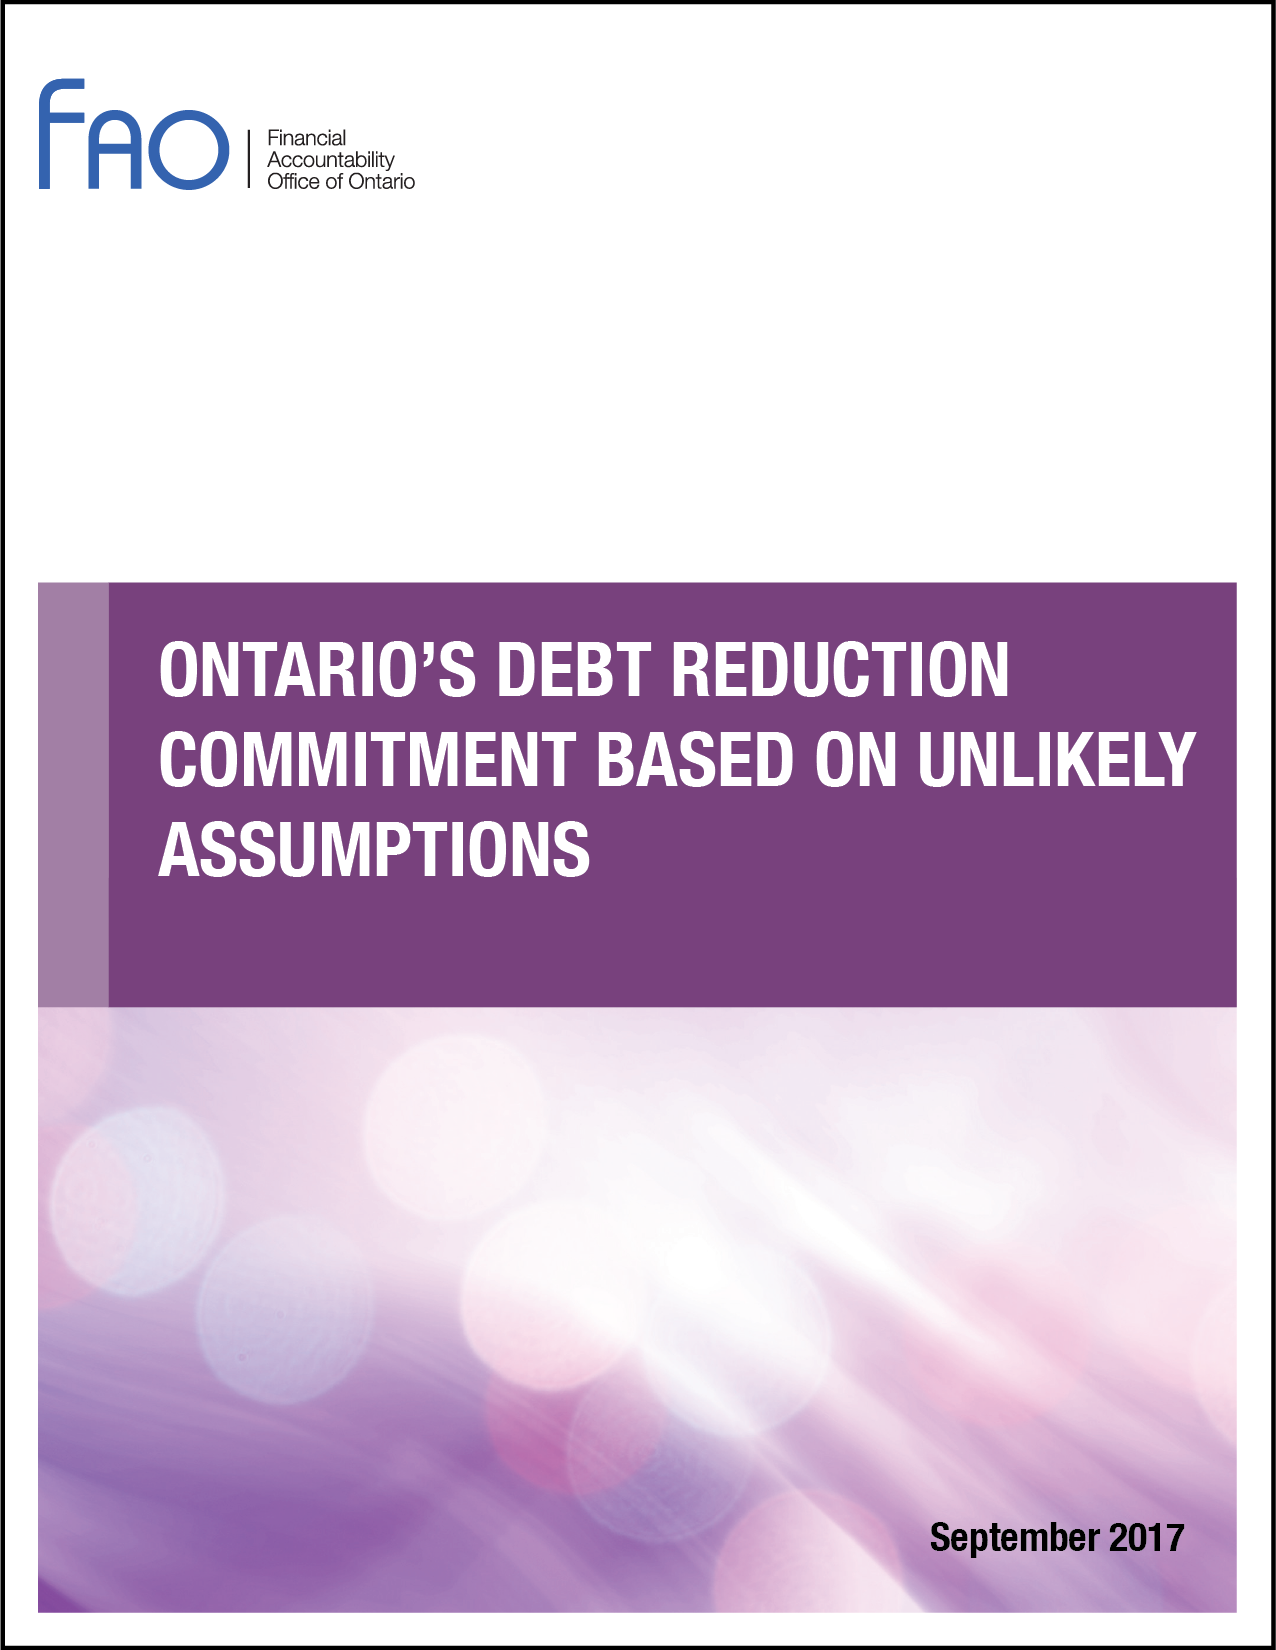 Ontario’s Debt Reduction Commitment Based on Unlikely Assumptions